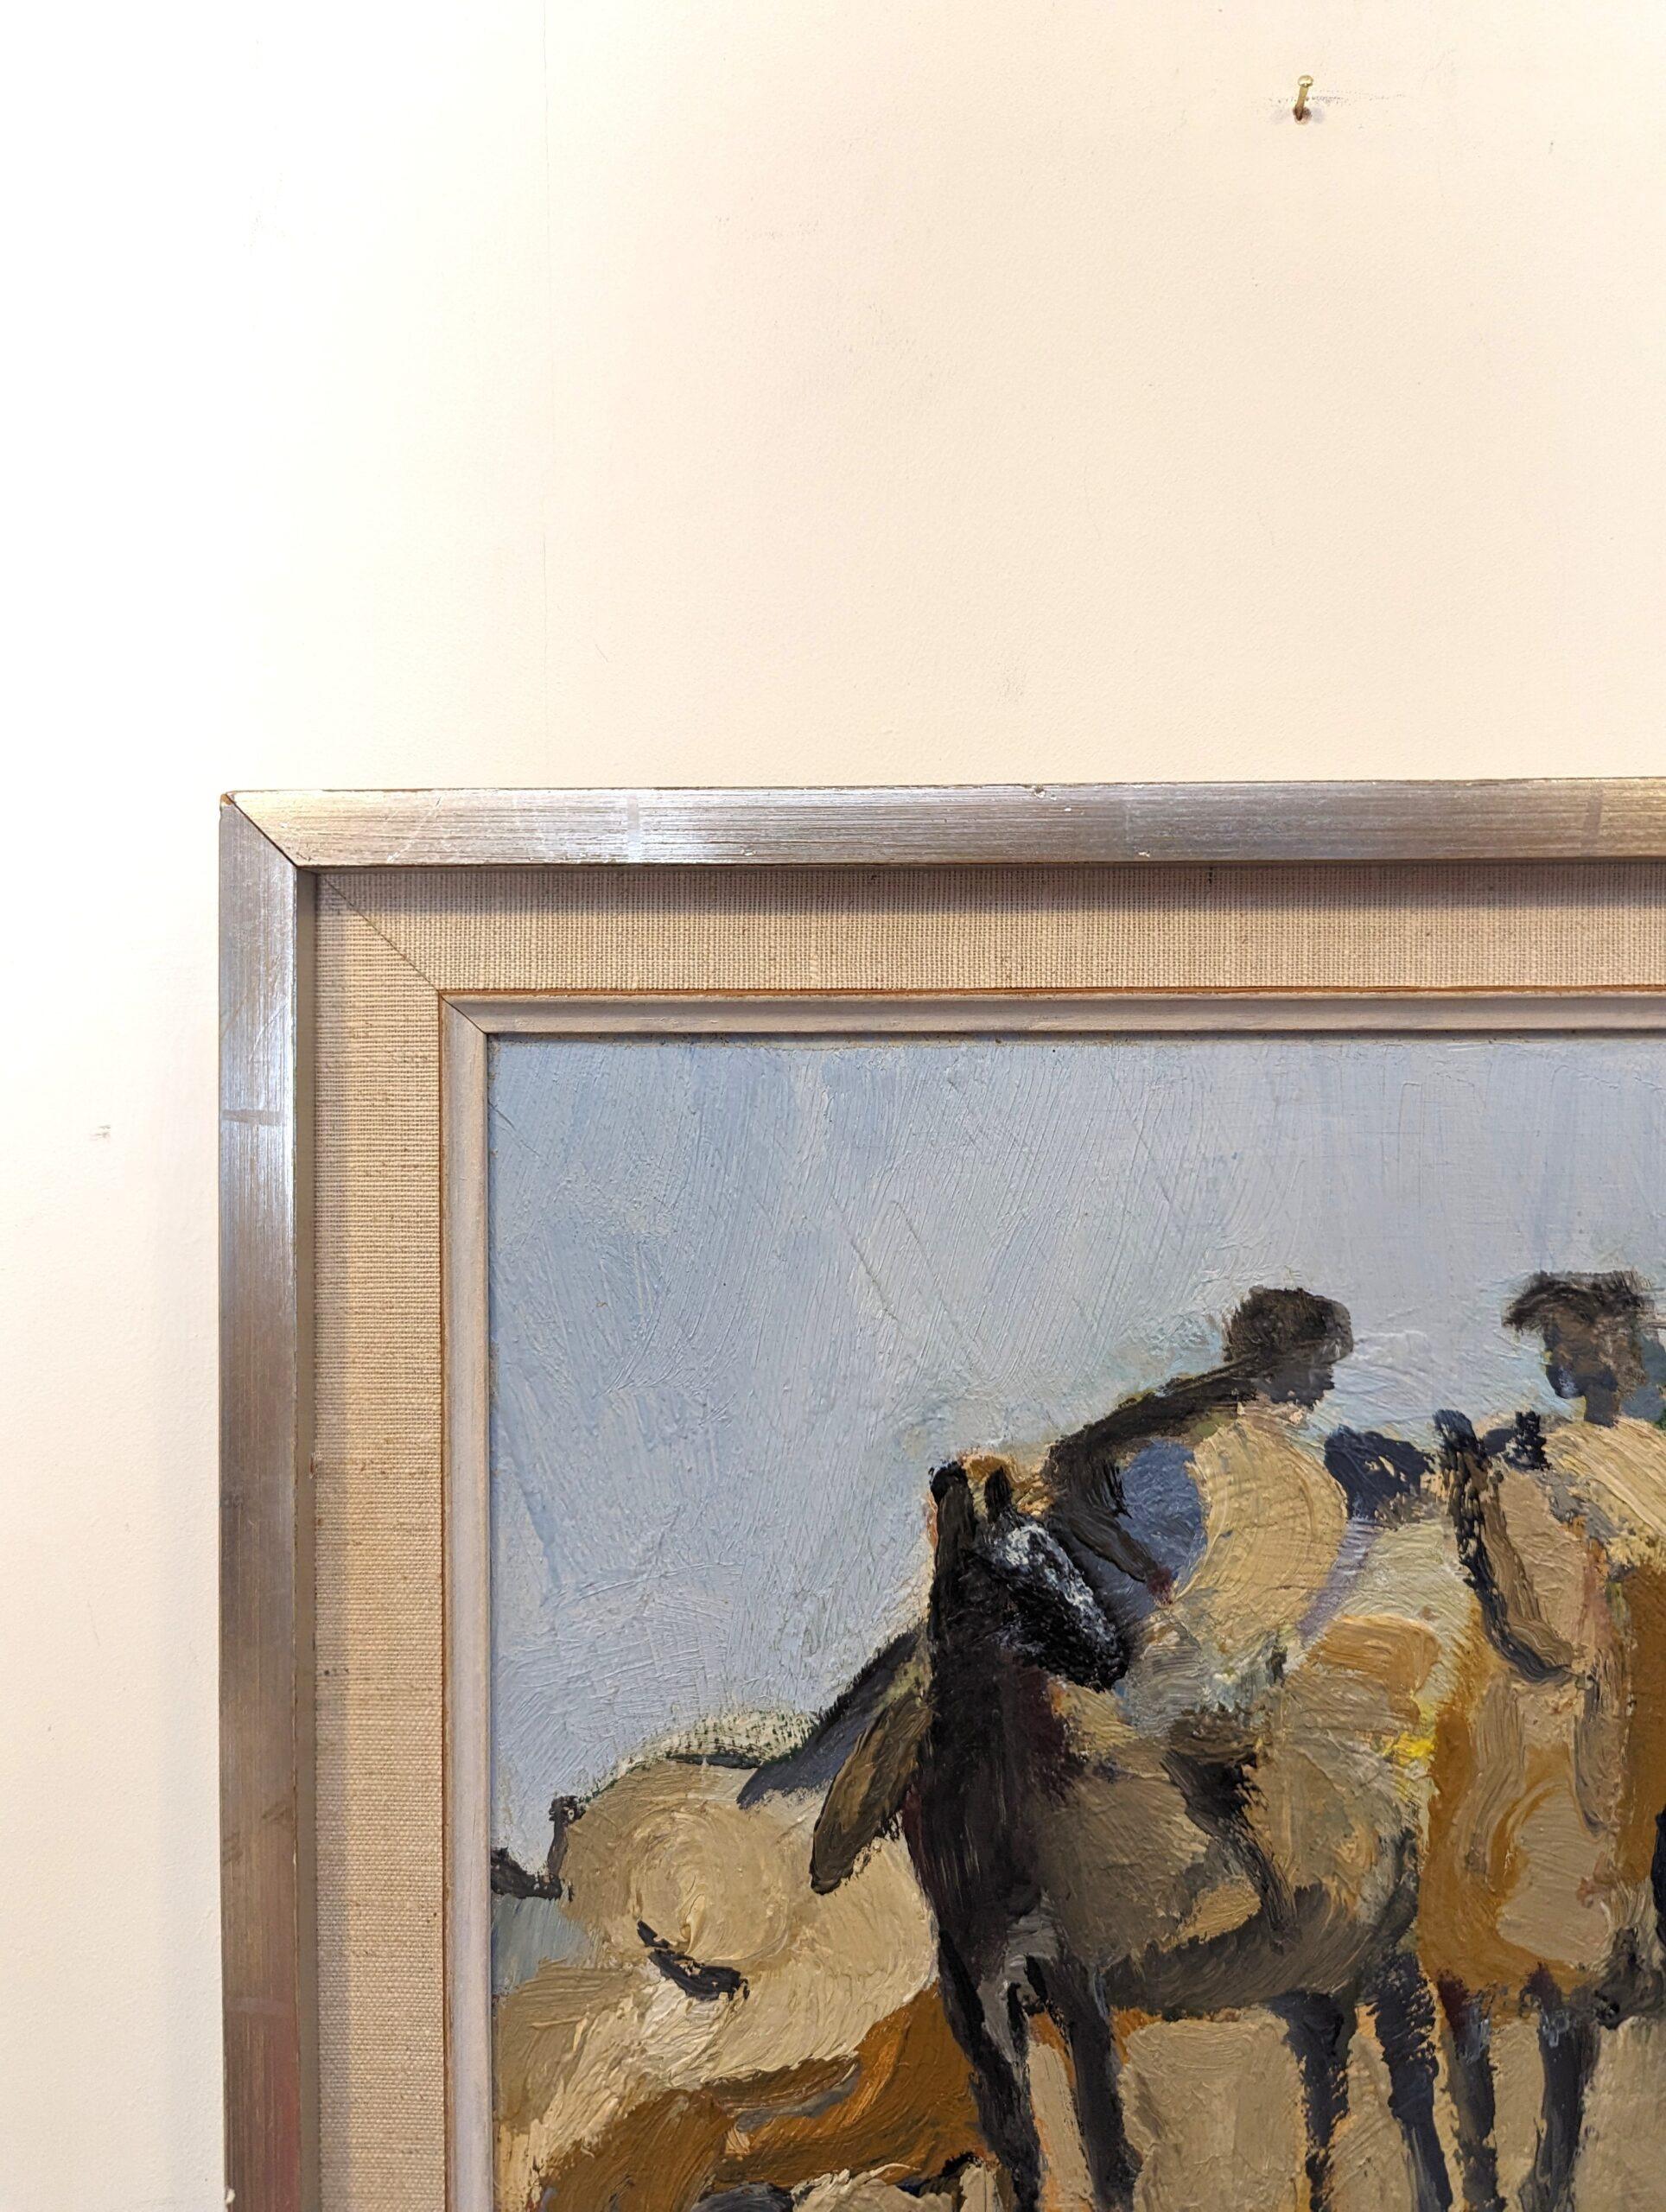 HORSE RIDERS
Size: 32 x 37 cm (including frame)
Oil on board

A brilliantly executed semi-abstract oil composition painted in 1963 by the established Swedish artist Ivar Morsing (1919-2009), whose works have been exhibited in public collections